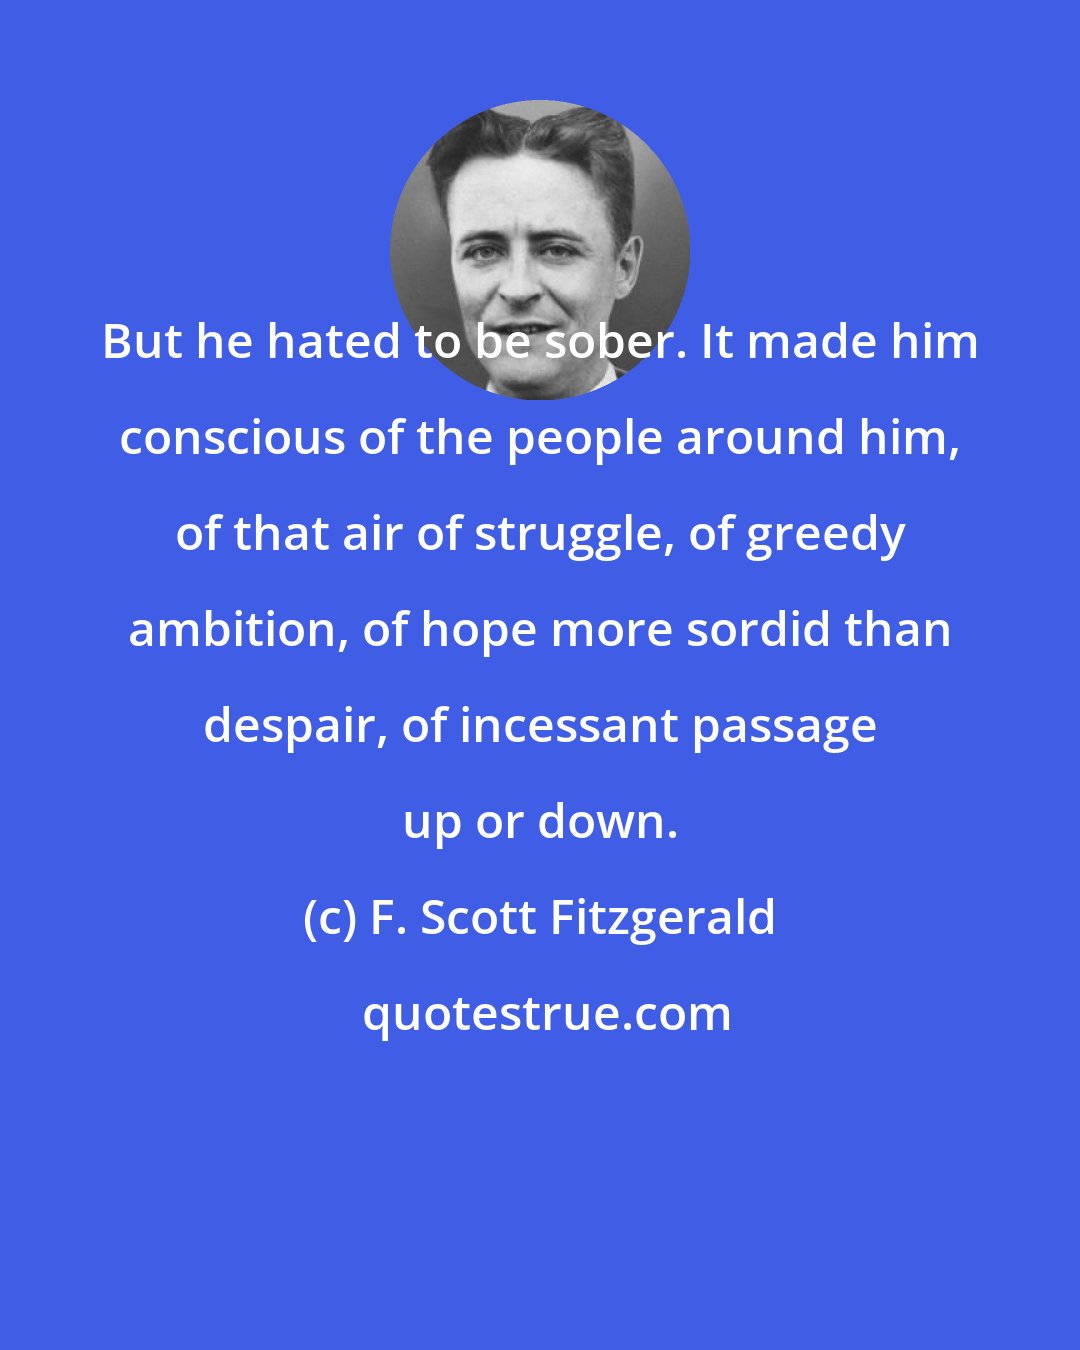 F. Scott Fitzgerald: But he hated to be sober. It made him conscious of the people around him, of that air of struggle, of greedy ambition, of hope more sordid than despair, of incessant passage up or down.